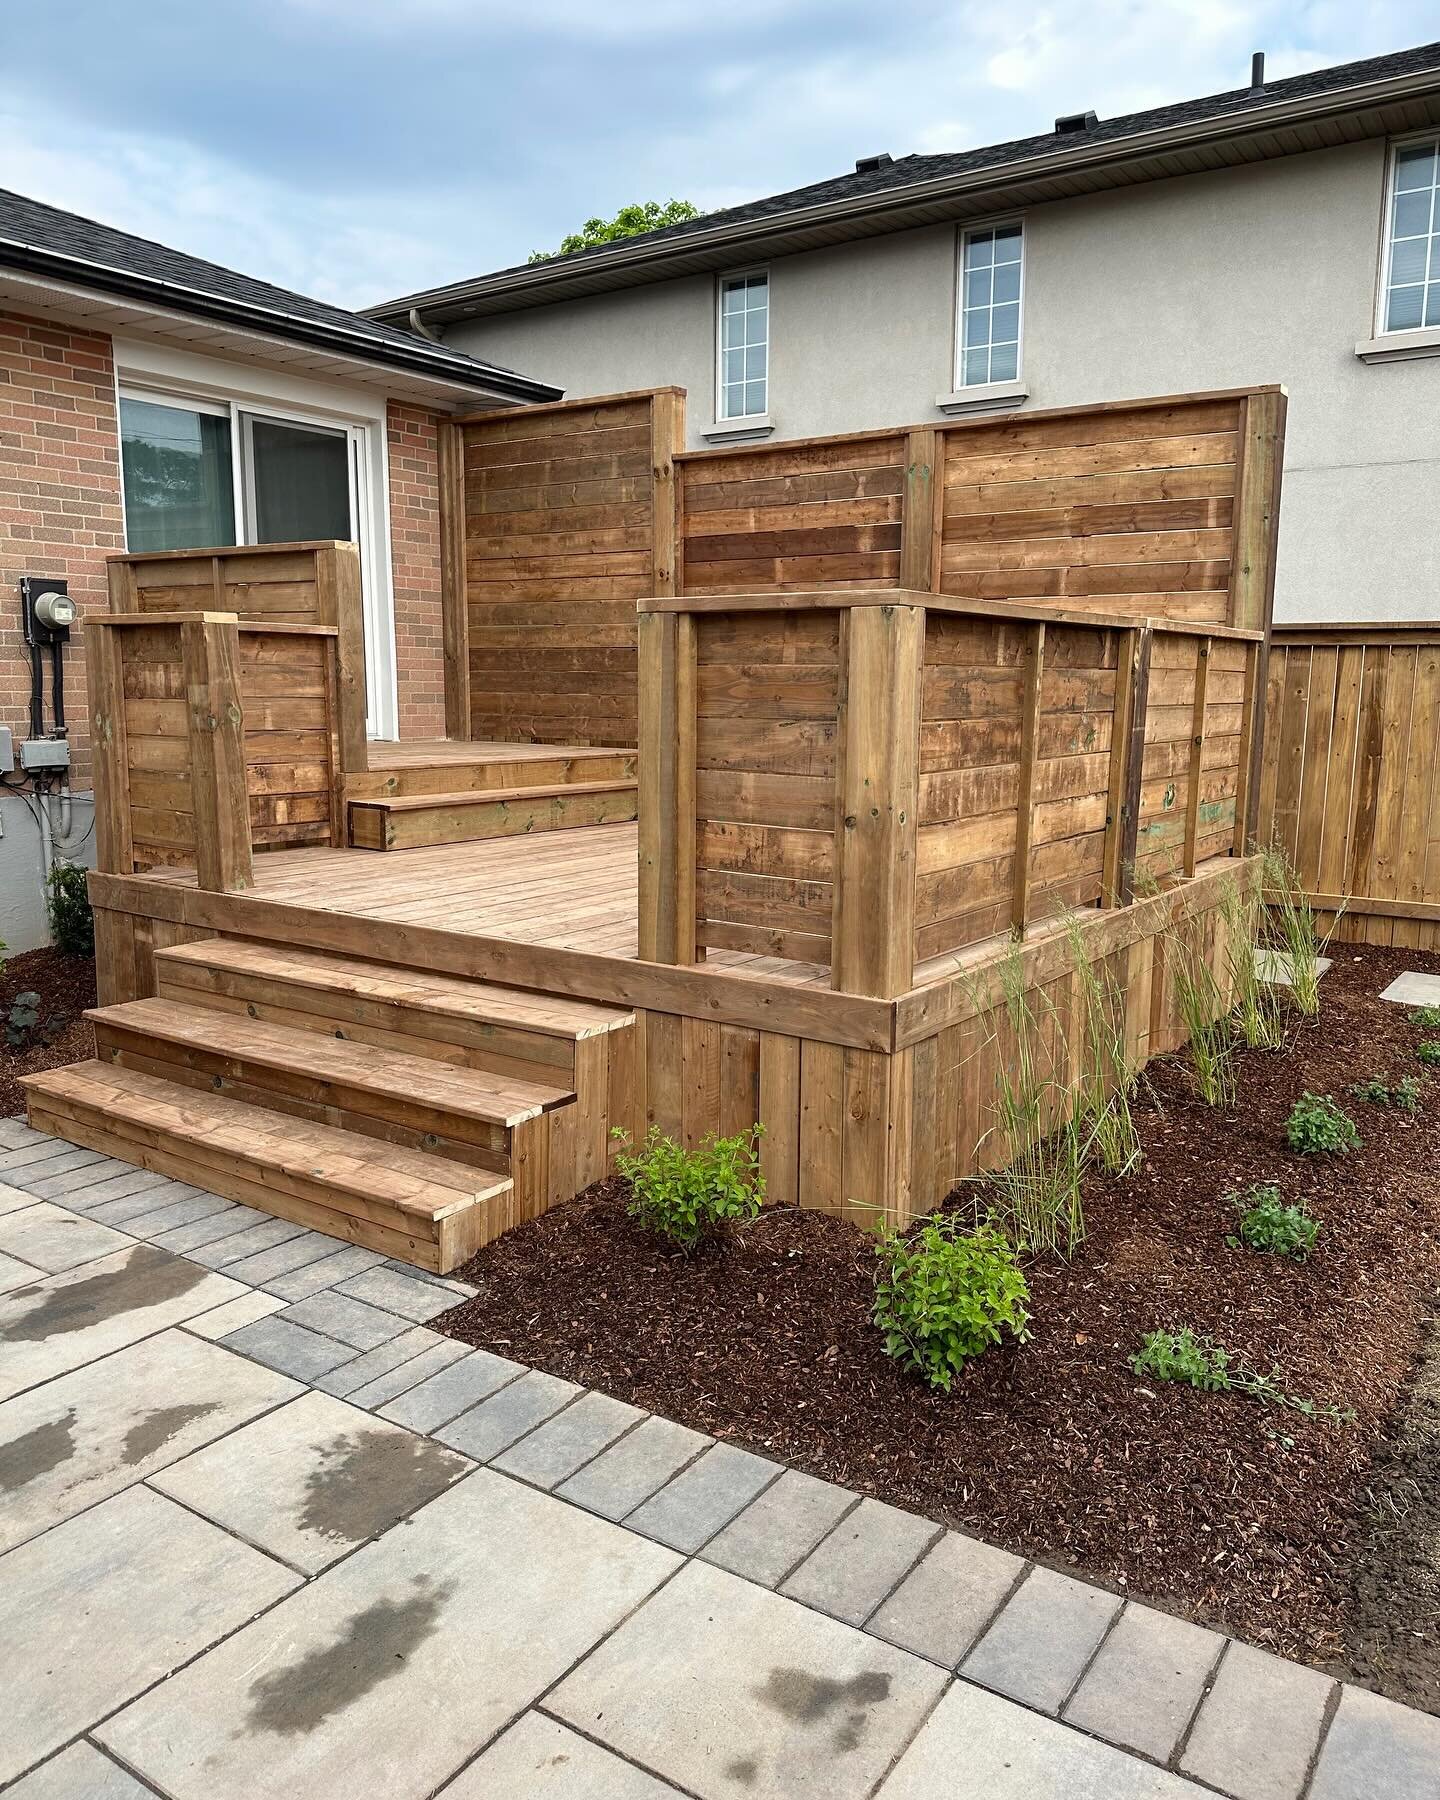 Deck - Pergola - Privacy Screen👌🏼 These additions turned out nice. 

Looking to add to your backyard? We can help. Contact us today! 

(905) 541-5888 
www.beyondthesite.ca 
#beyondthesite #onsite #BTS #jobsite #construction #hvac #milwaukee #carpen